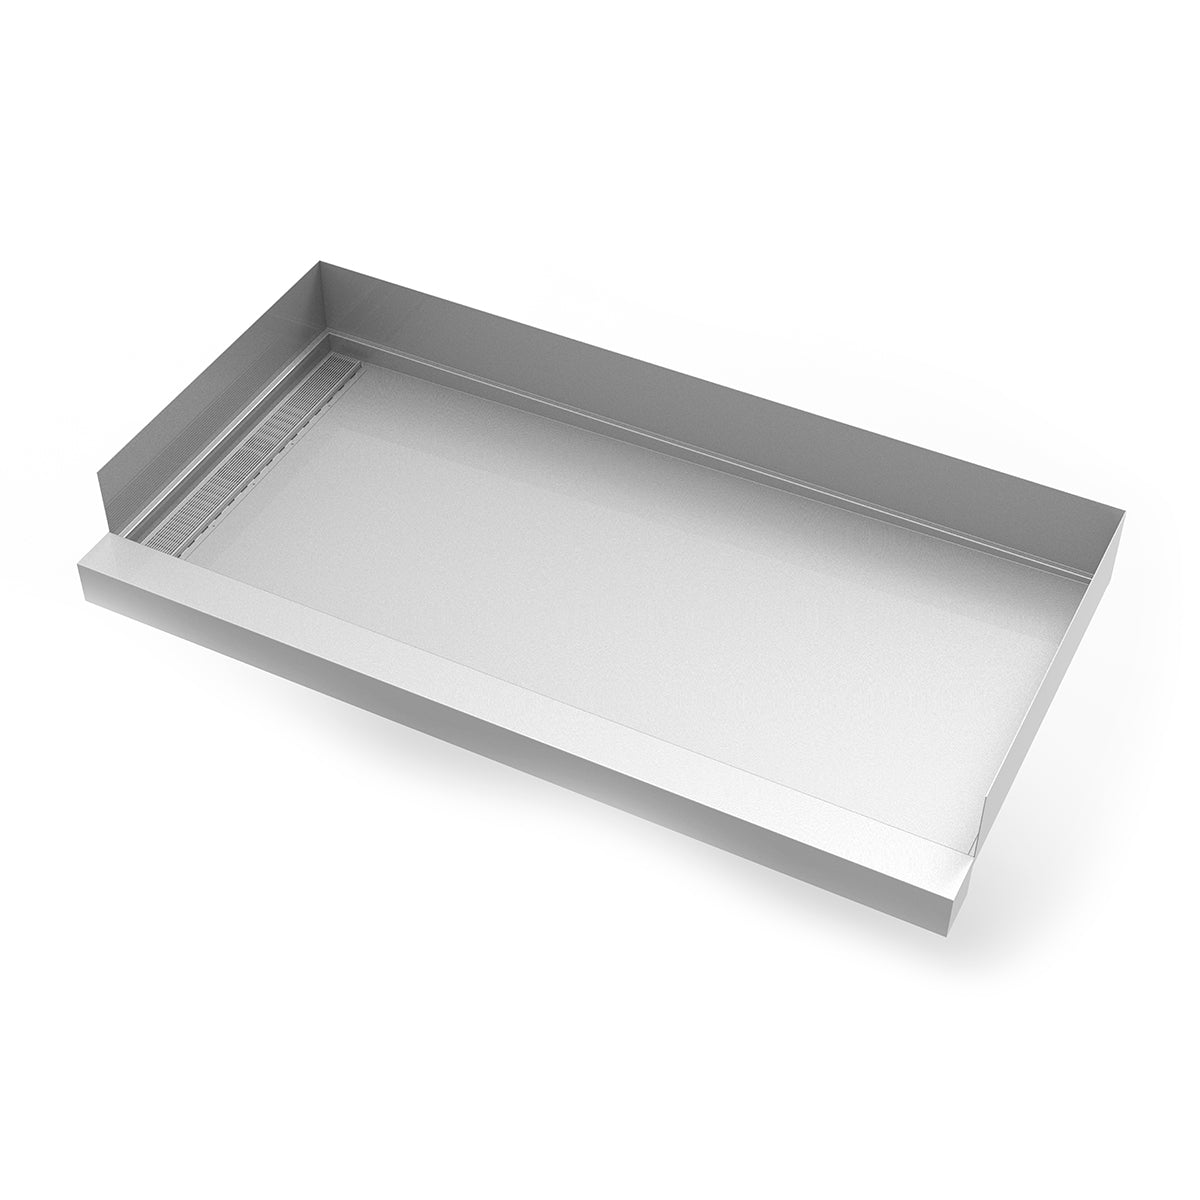 Infinity Drain 30"x 60" Stainless Steel Shower Base with Left Wall Wedge Wire Linear Drain location